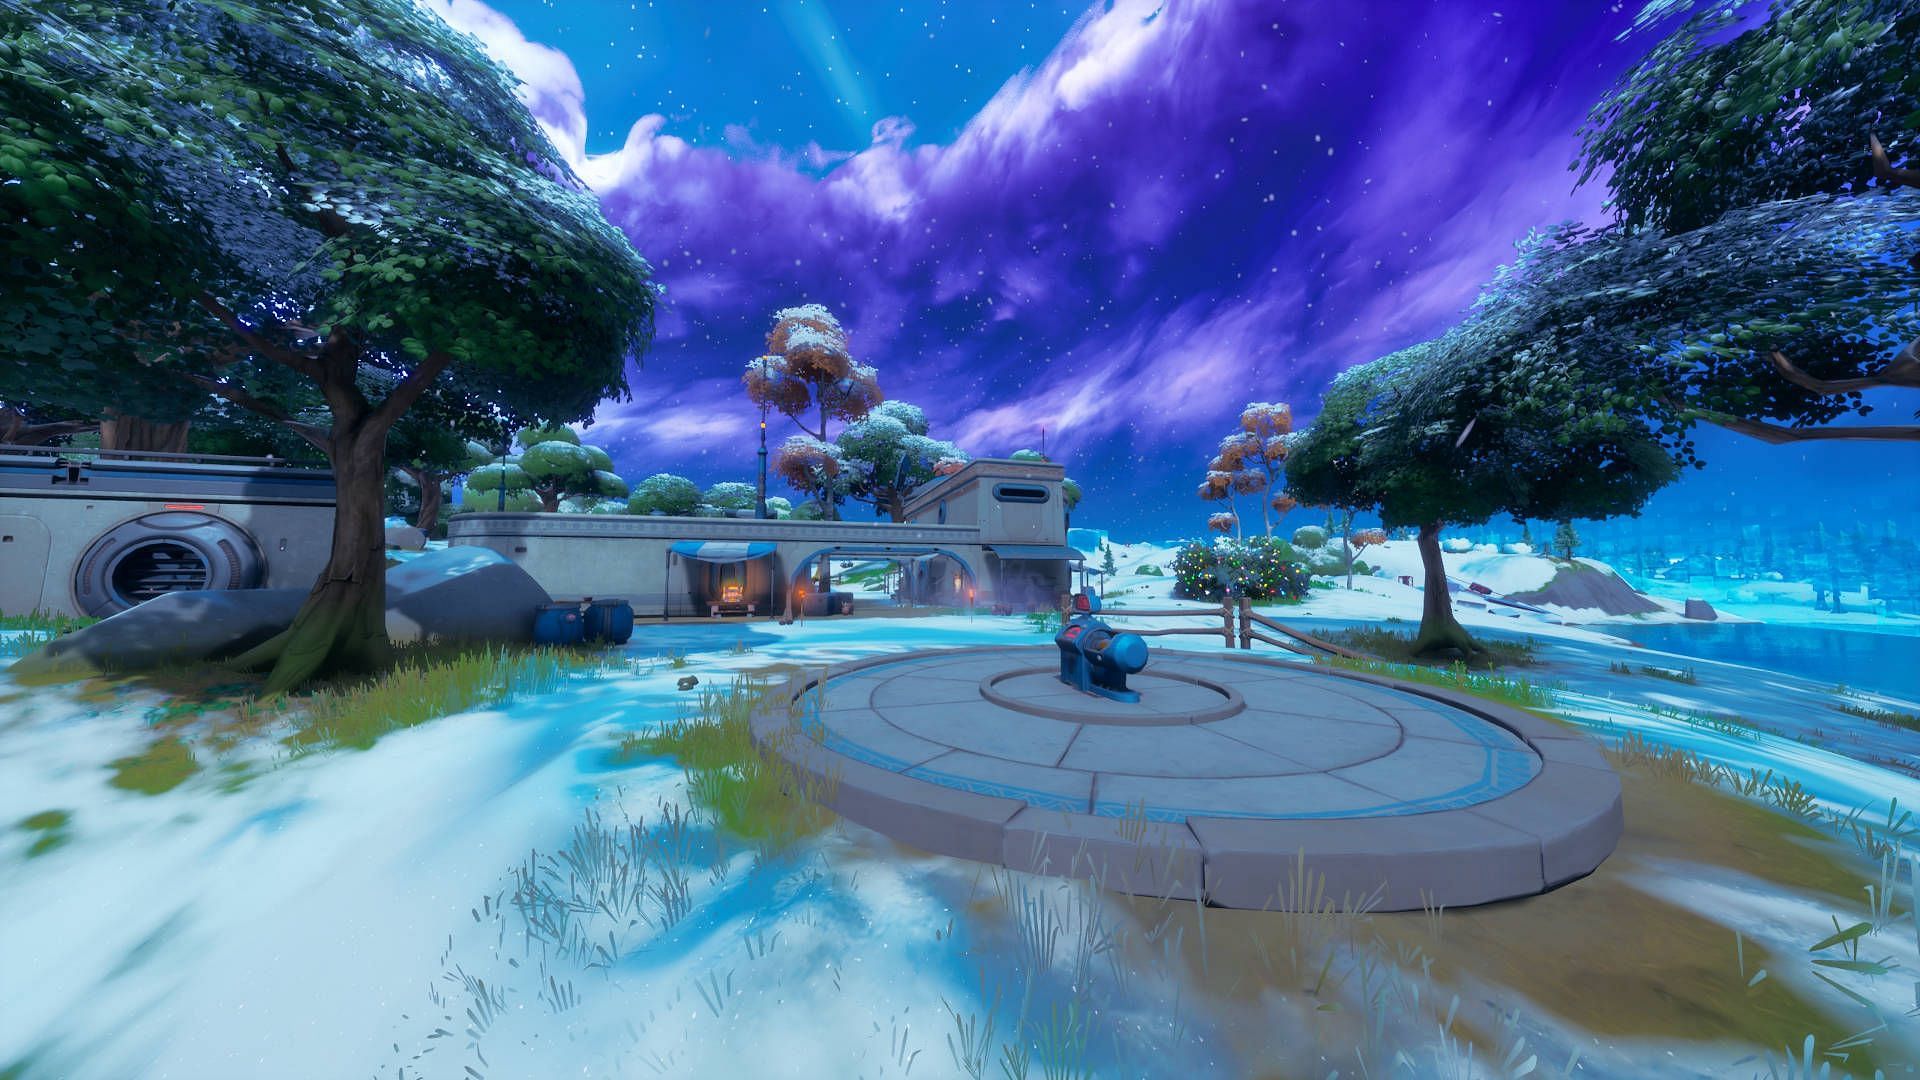 Fortnite players may soon be able to teleport on the island using a device in Chapter 3 Season 2 (Image via Epic Games)